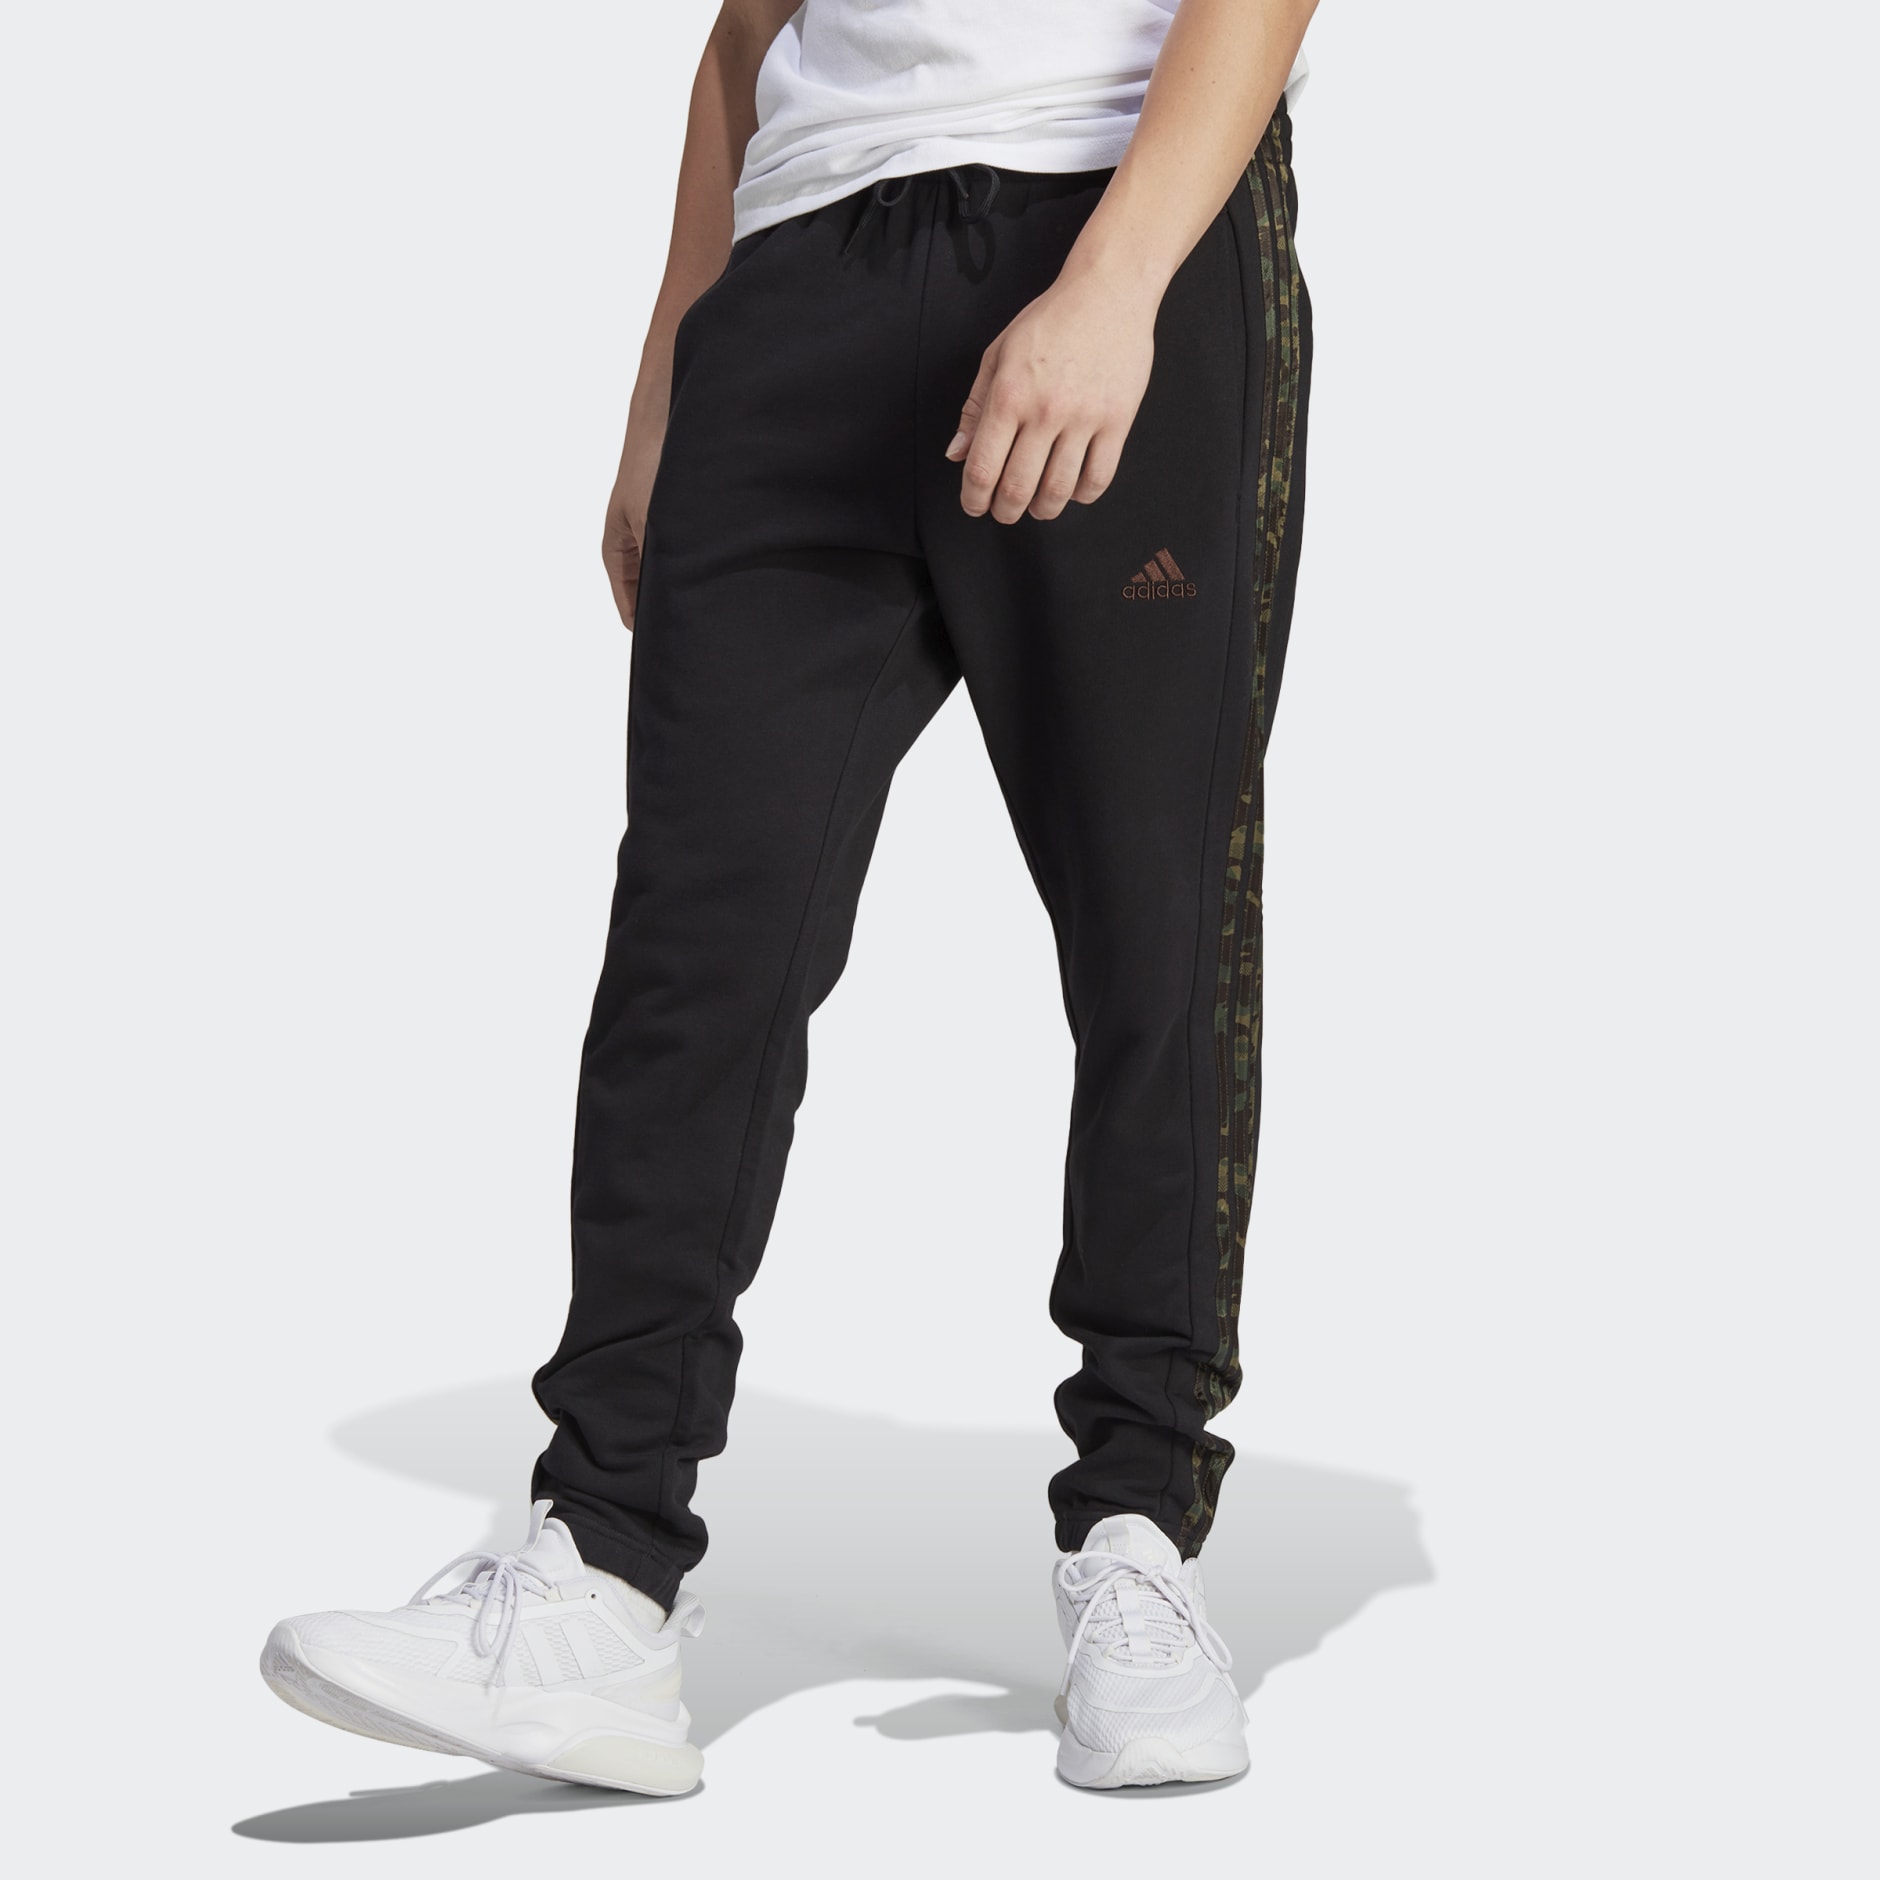 Essentials GH Cuff Black adidas Pants Elastic Tapered - French | adidas 3-Stripes Terry